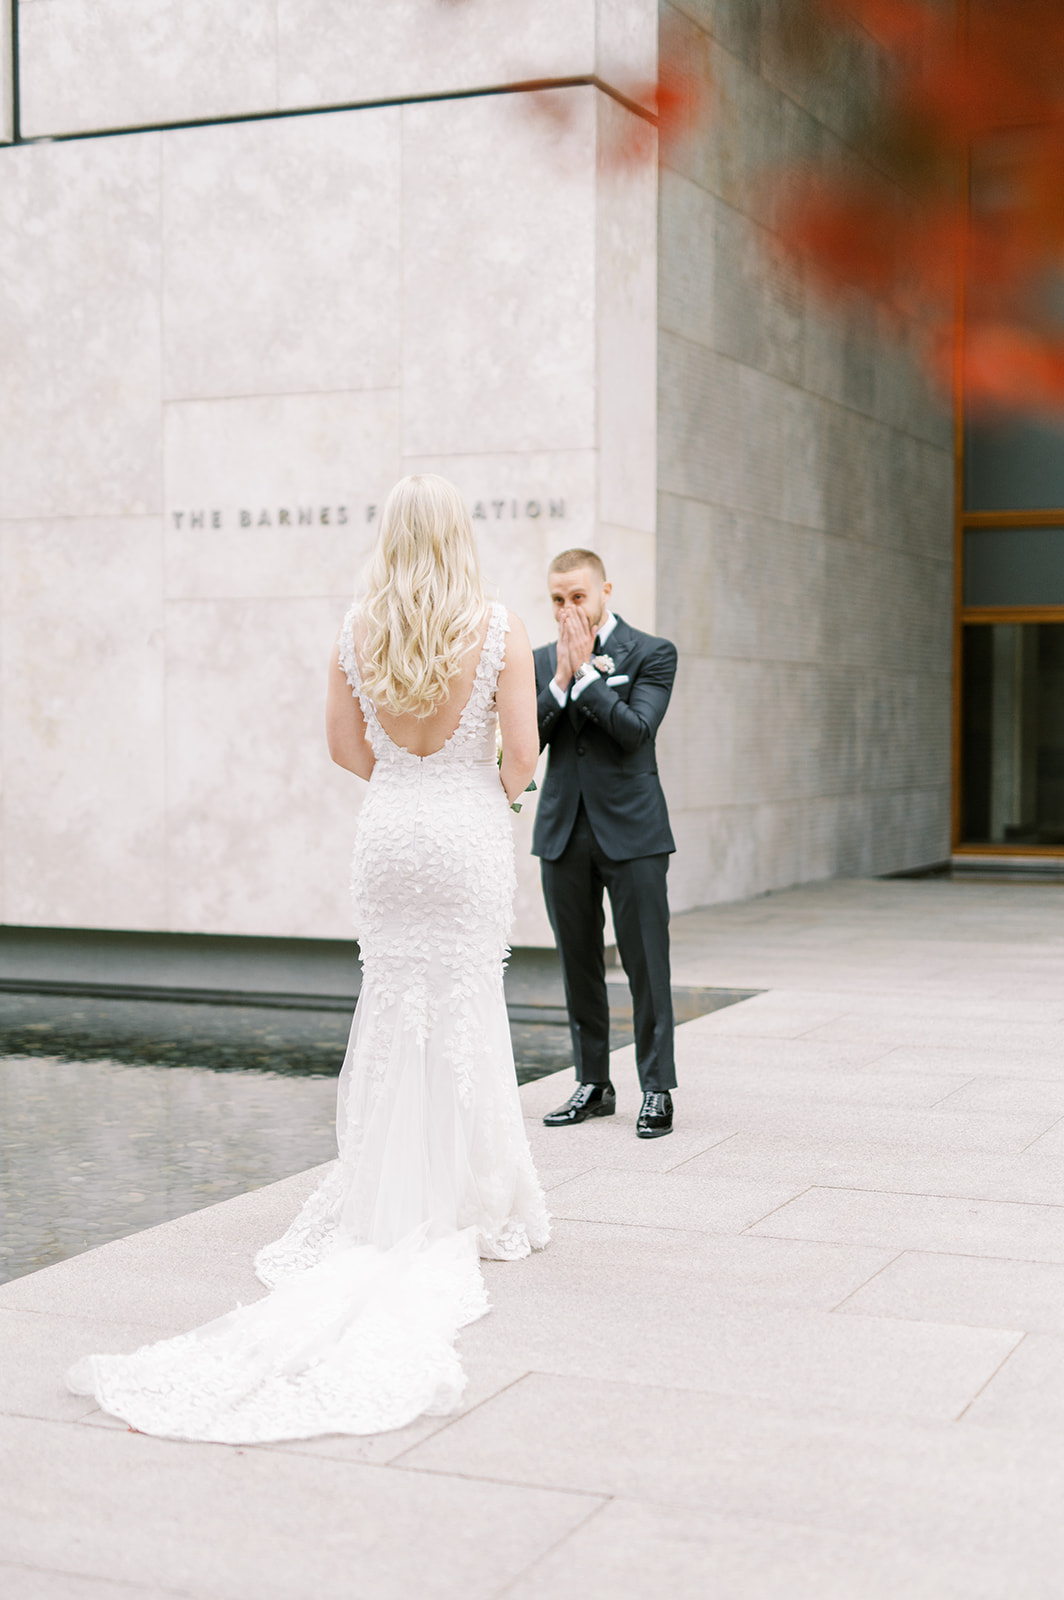 Groom surprised after seeing his bride for the first time at the Barnes Foundation reflecting pool